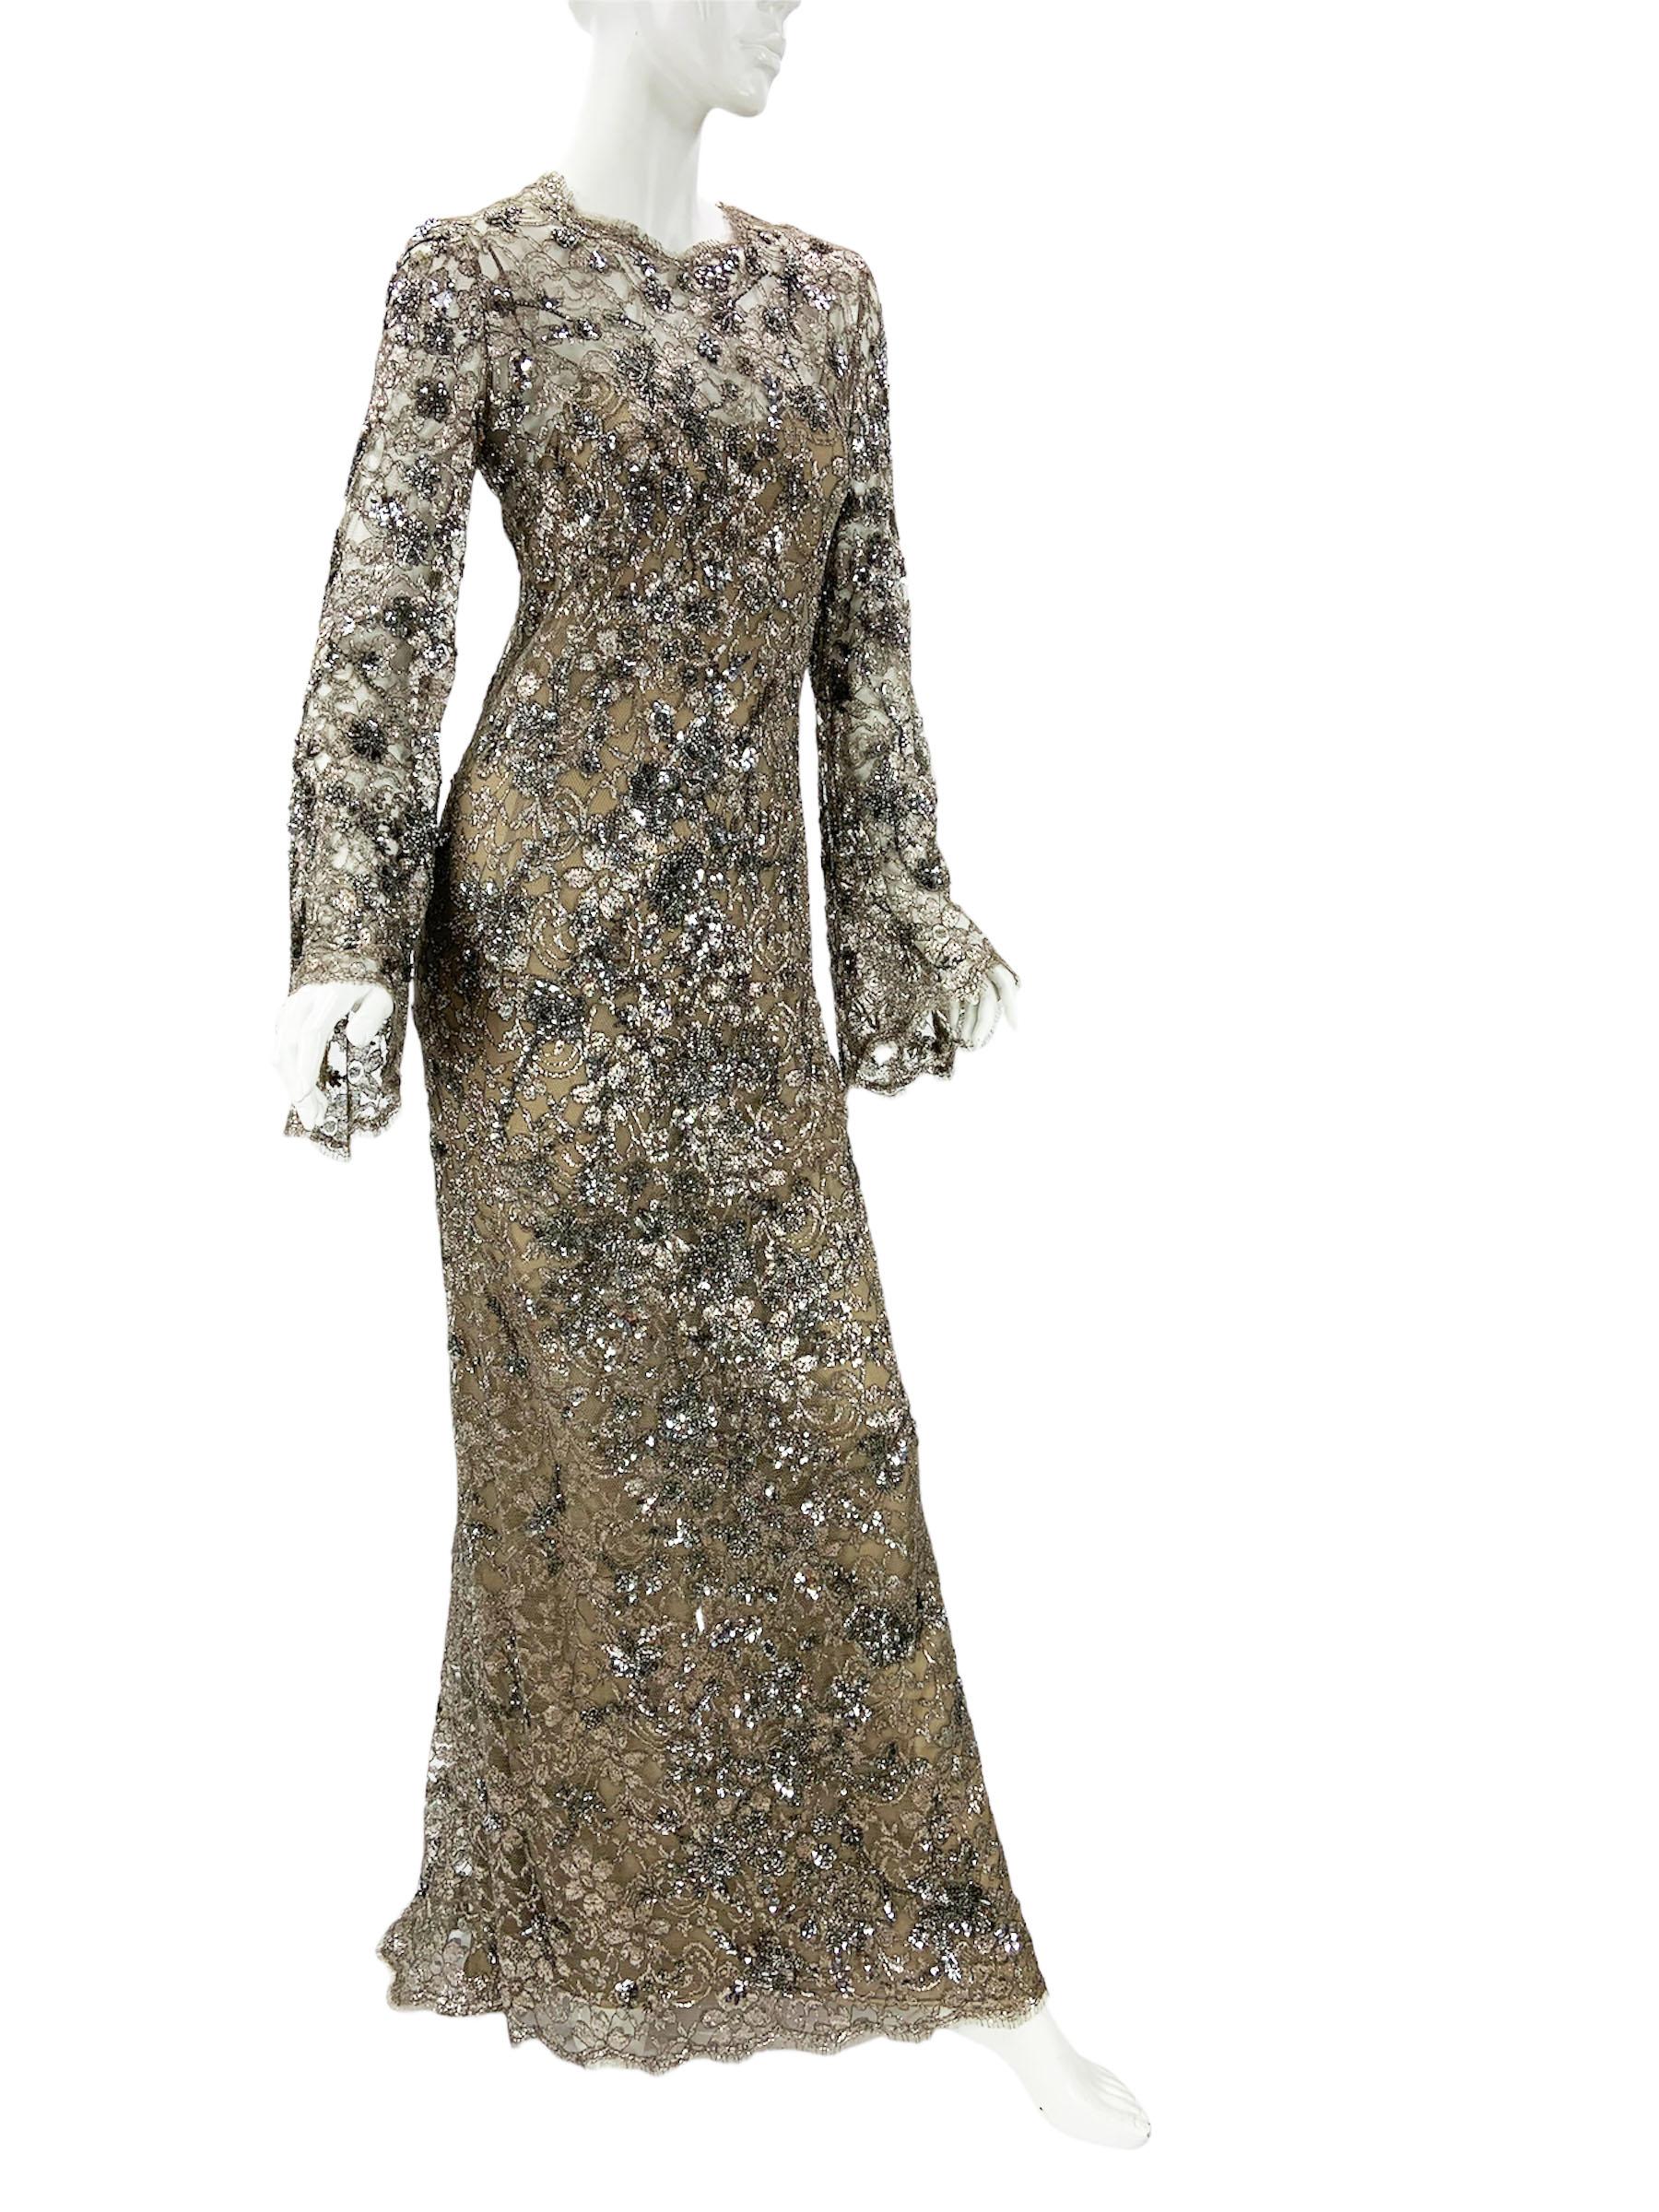 Vintage Oscar de la Renta Fully Embellished Smoky Gray Lace Dress Gown 
US size - 10
Smoky gray color lace with silver metallic floral embroidery embellished with silver tone sequins and smoky gray color beads. A-line silhouette,  Bell sleeves, Back